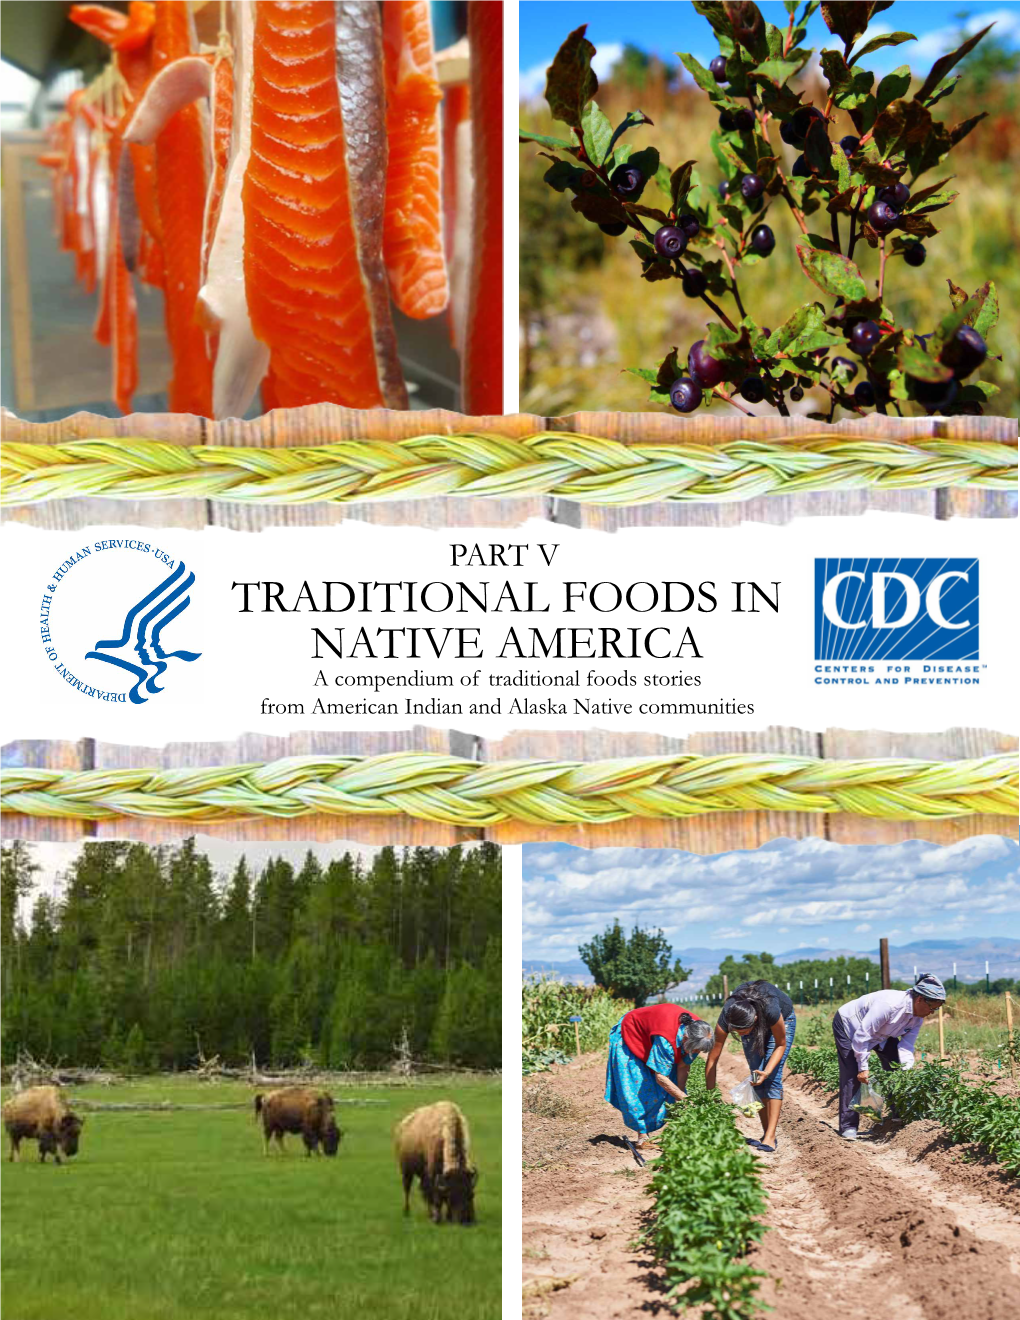 Part V, Traditional Foods in Native America